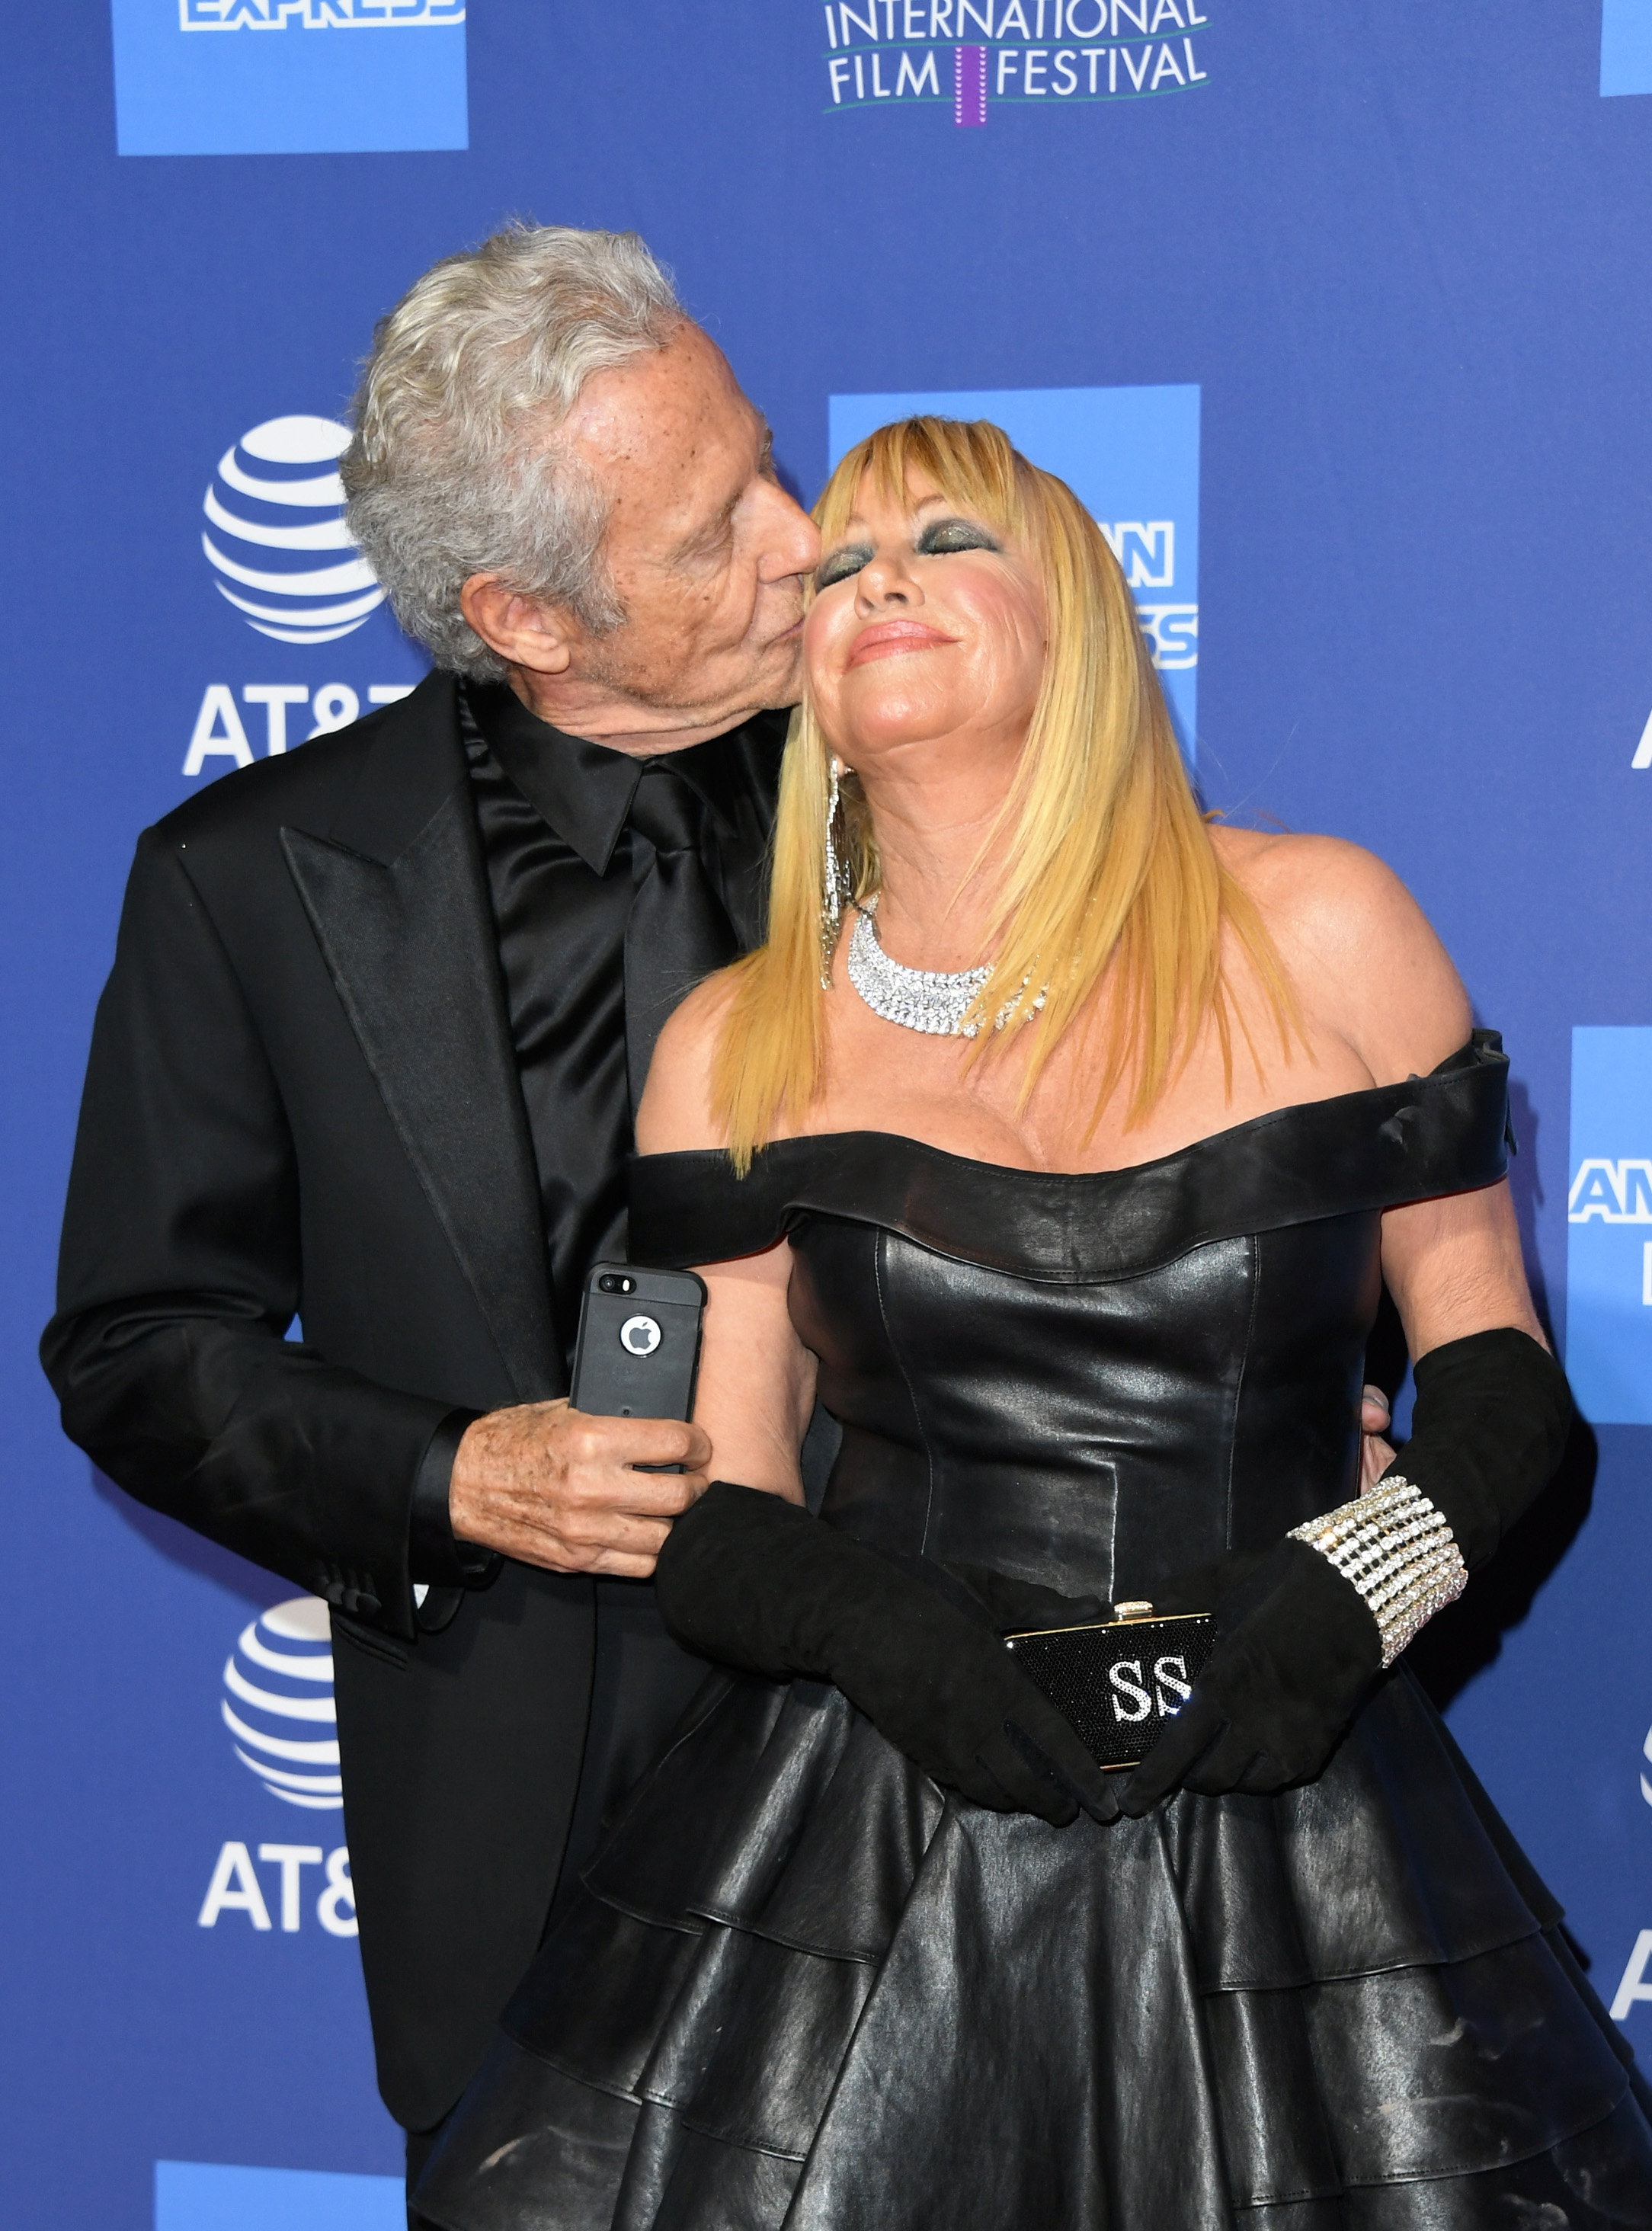 Alan Hamel y Suzanne Somers en la Search the world's best editorial photos Editorial Images Creative Editorial Video Creative Editorial 30th Annual Palm Springs International Film Festival Film Awards Gala | Foto: Getty Images